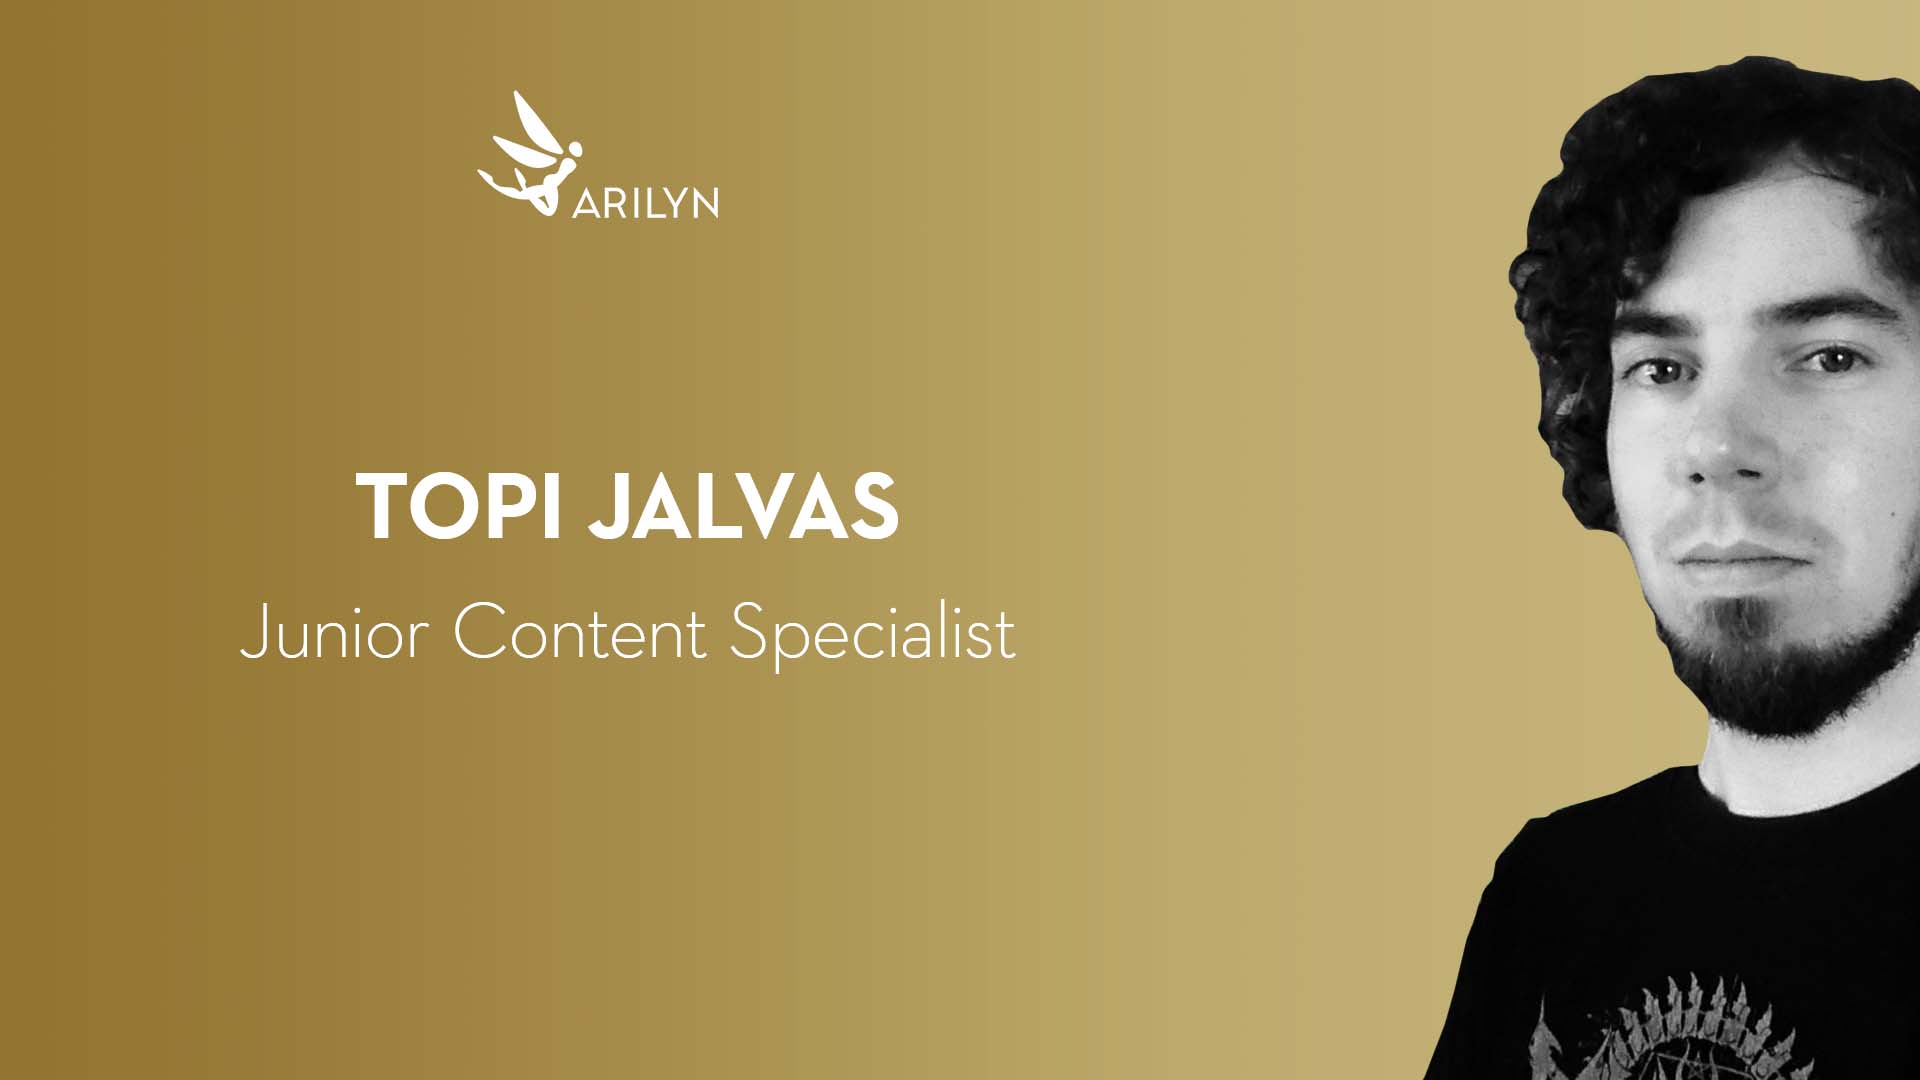 Get to know Arilyn – Topi, Junior Content Specialist